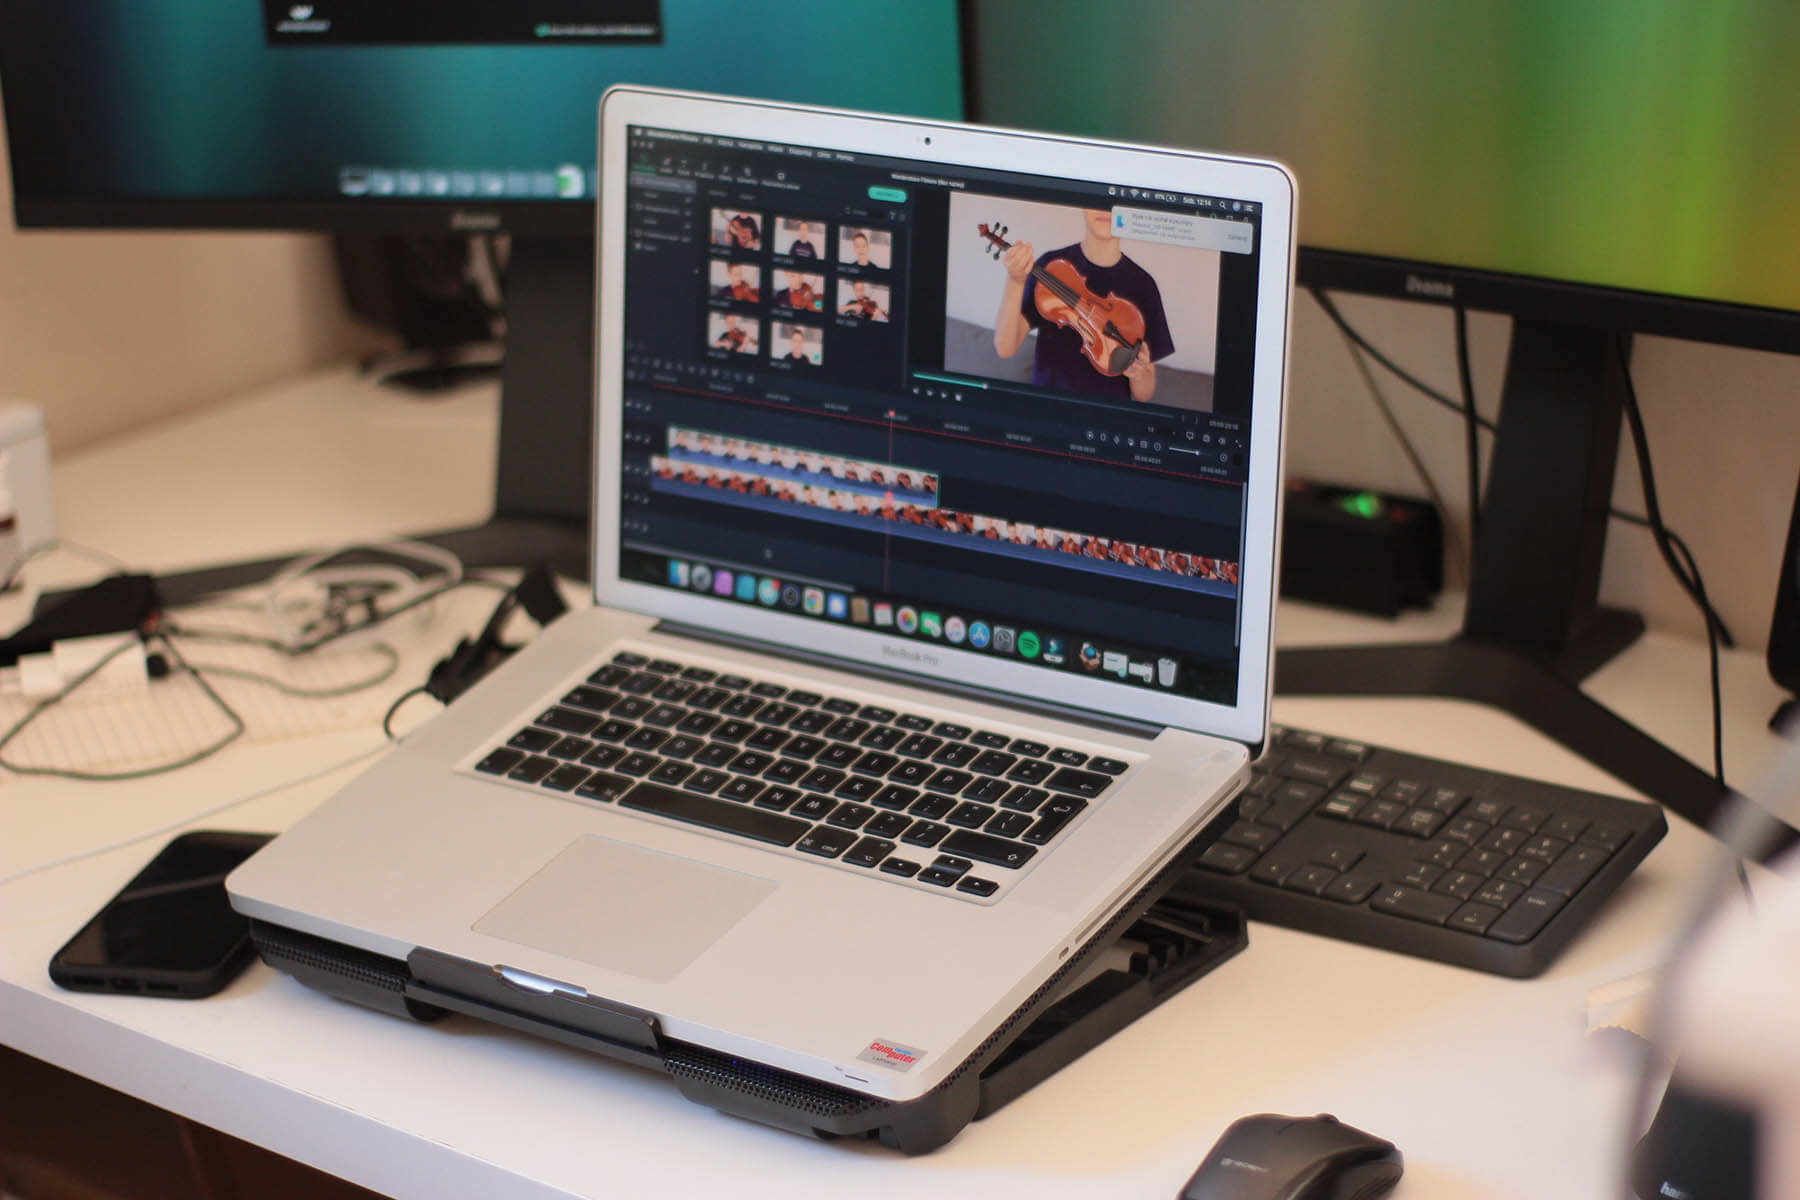 Introduction to Final Cut Pro on a laptop